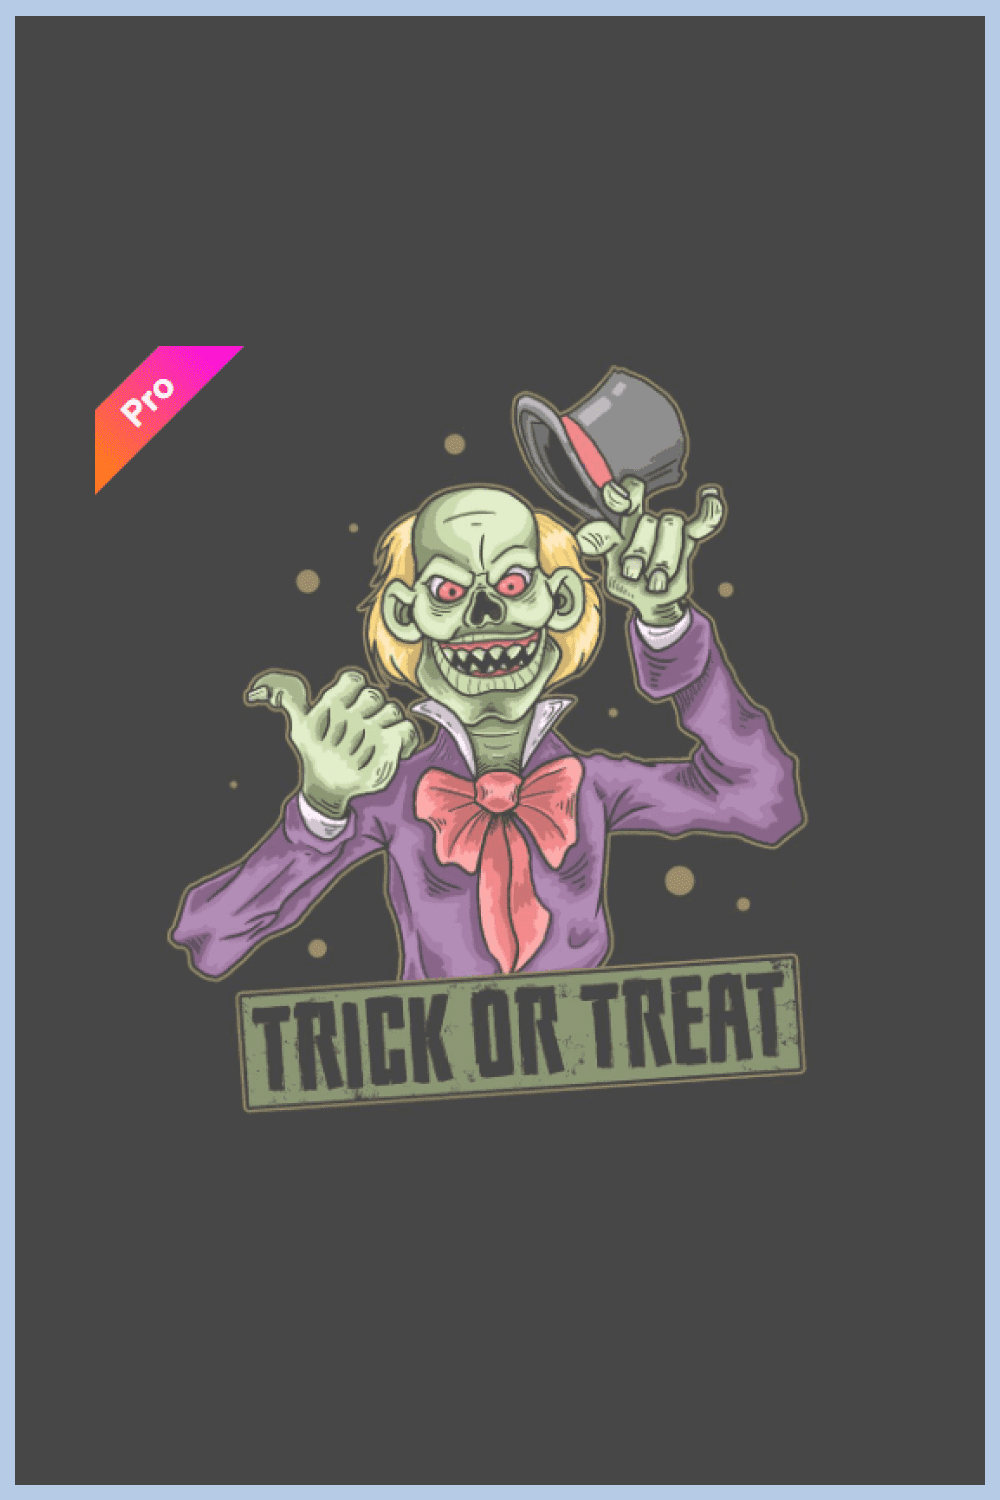 Zombie clown is ready to entertain you on Halloween.